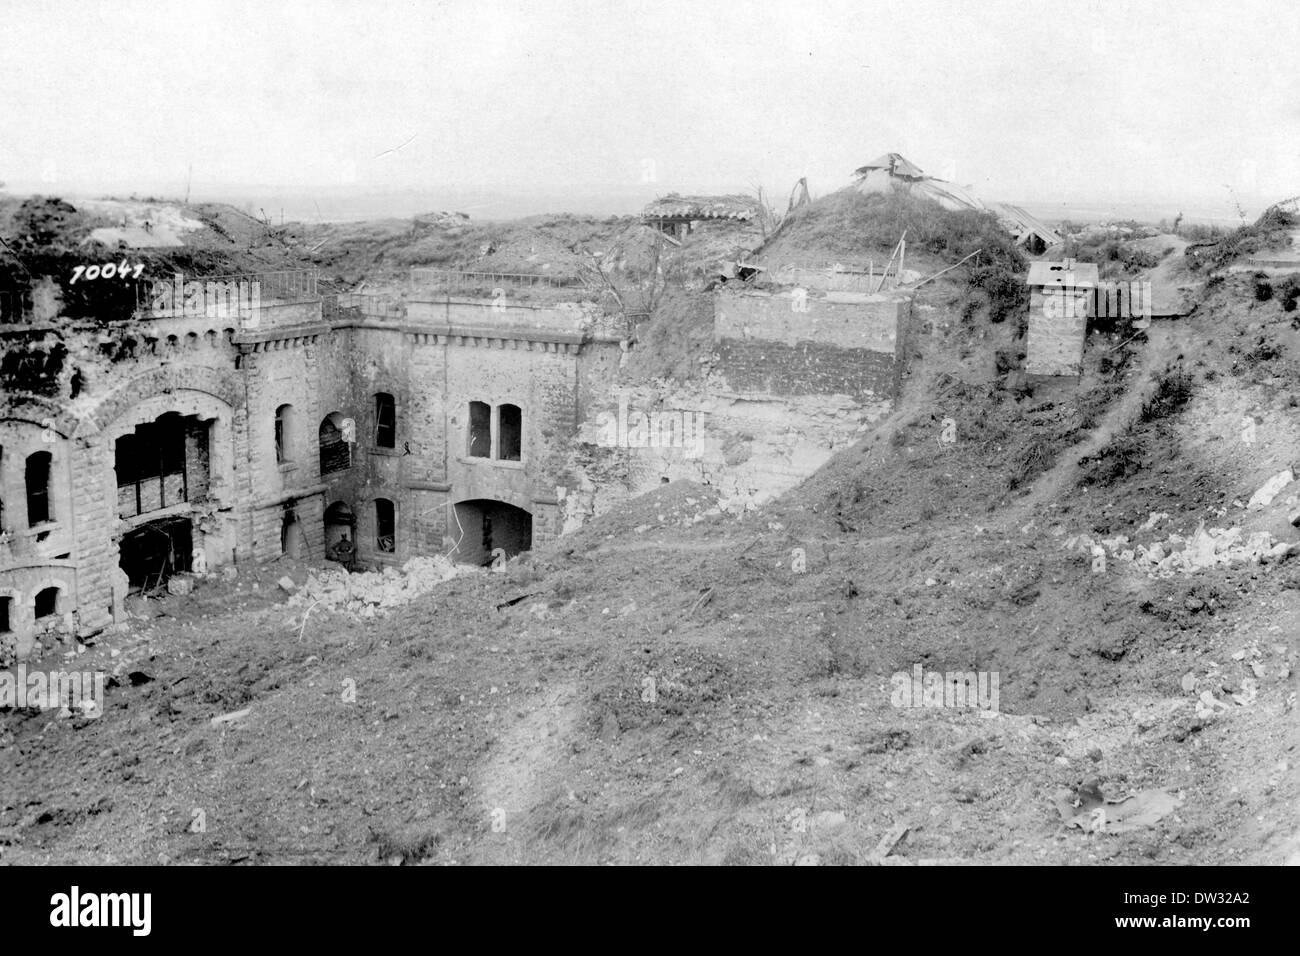 The destroyed Fort de Conde at the Western Front during World War One near Soissons, France, 1918. Photo: Berliner Verlag / Archive - NO WIRE SERVICE Stock Photo